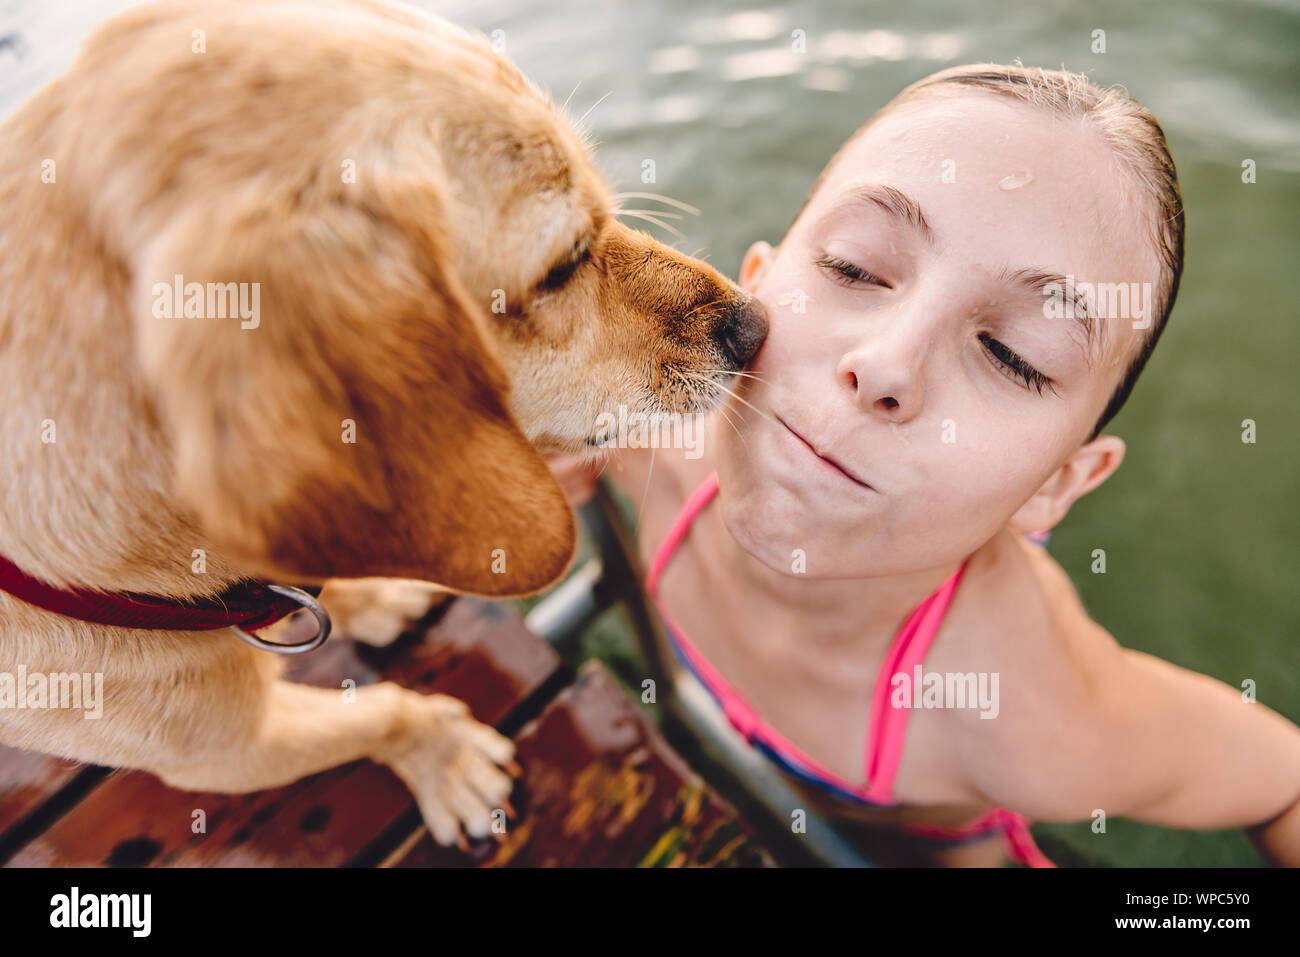 Little girl getting out of water while dog licking her face Stock Photo